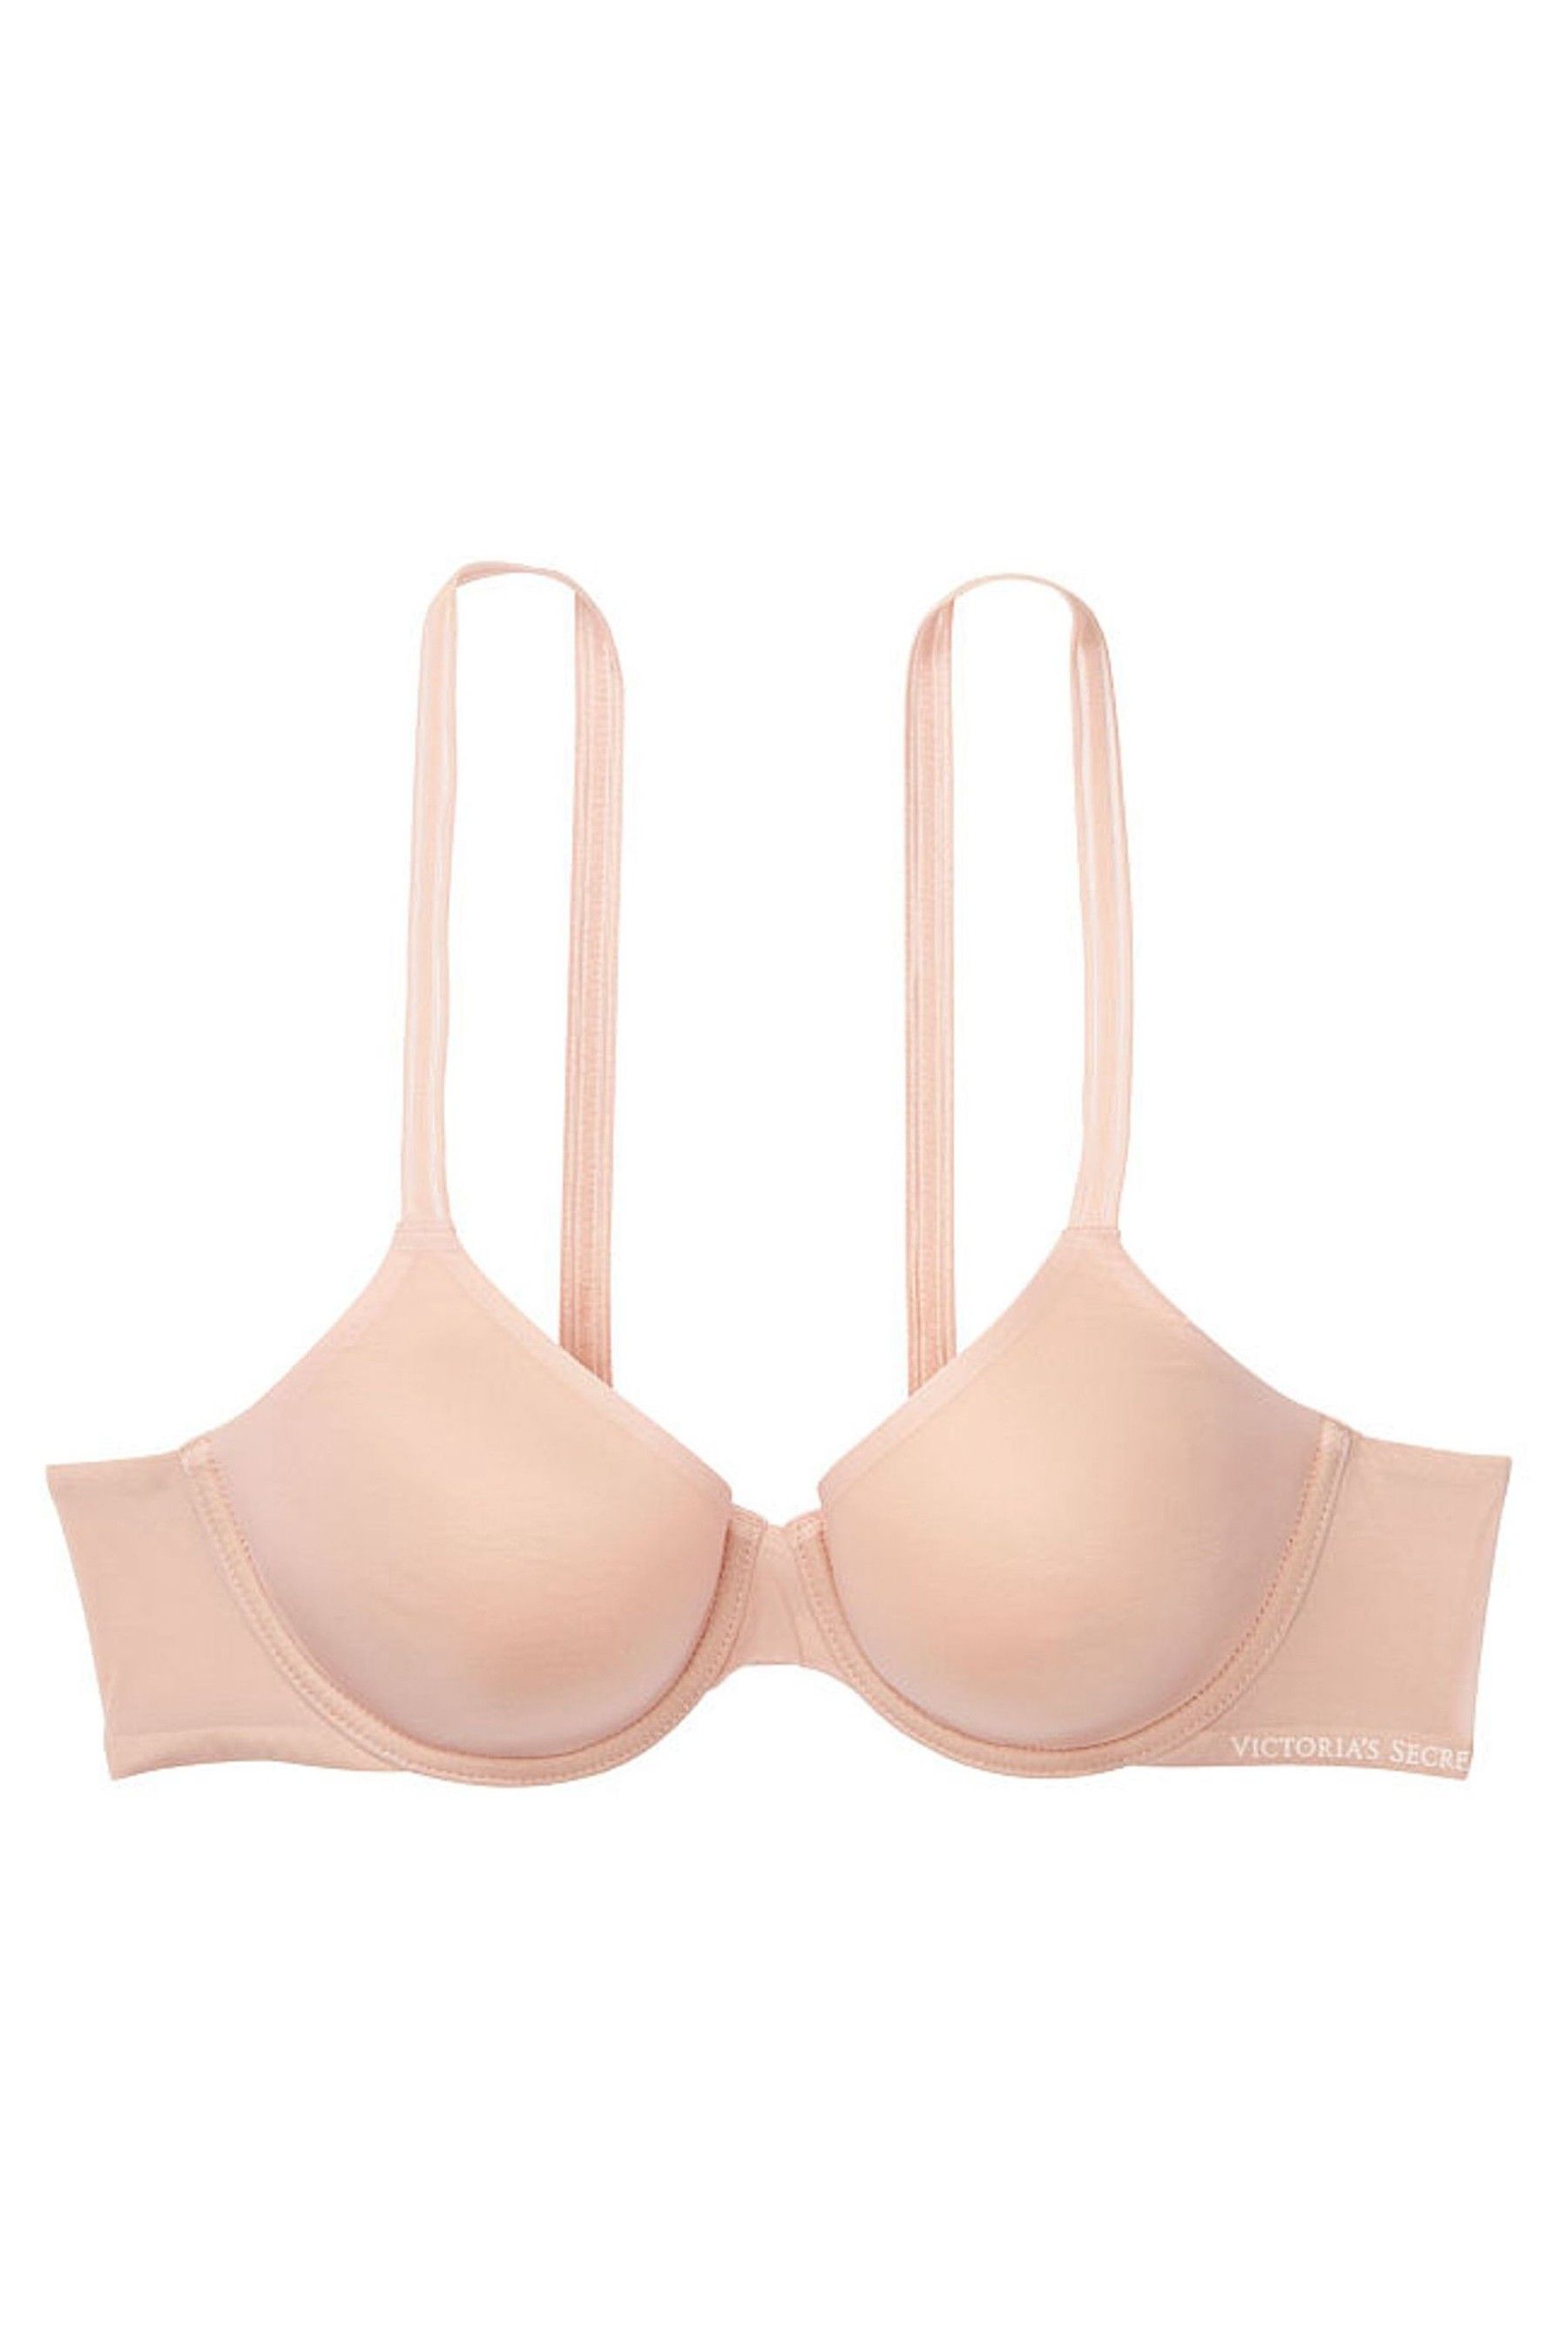 Buy Victoria's Secret Angelight Full Coverage Bra from the Victoria's ...